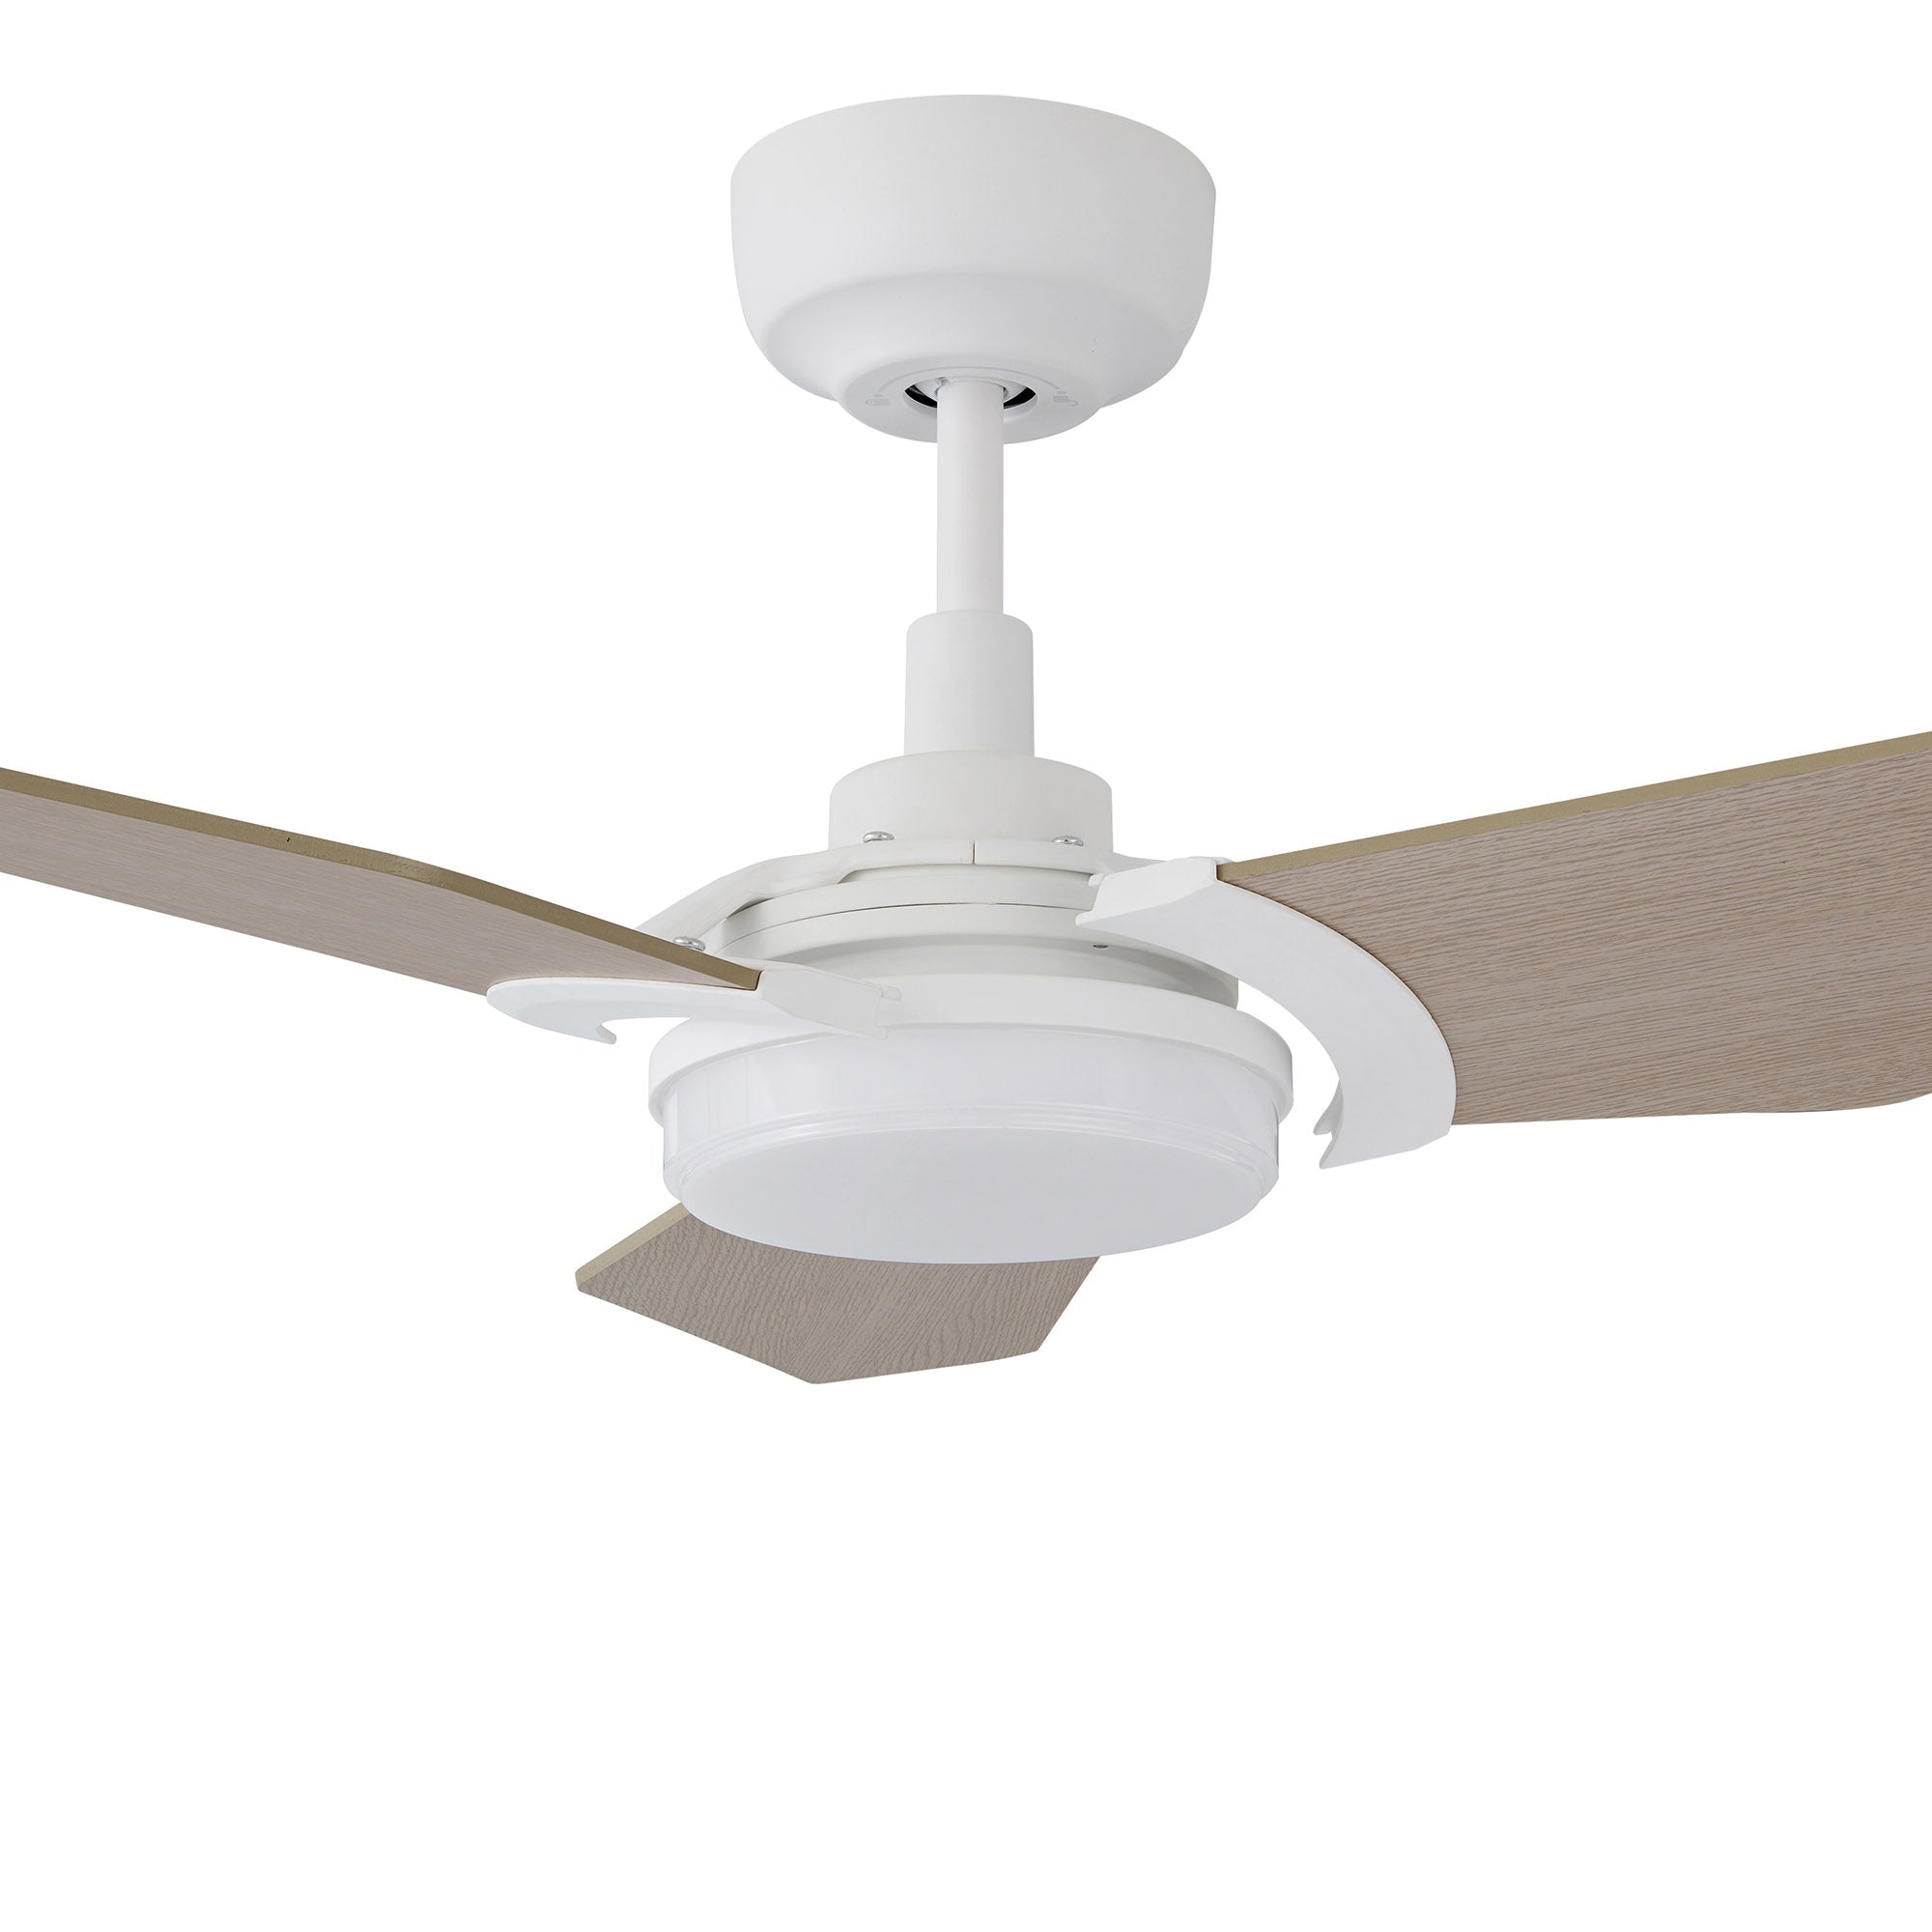 The Smafan Trailblazer 52'' Smart Fan’s sleek and stylish design fits perfectly with any décor trend. With a fully dimmable, and energy-efficient LED kit, whisper-quiet operation, compatible with Alexa, Google Assistant, Sir, phone app, easy install, Trailblazer helps you have a smarter way to stay cool.#color_Light-Wood